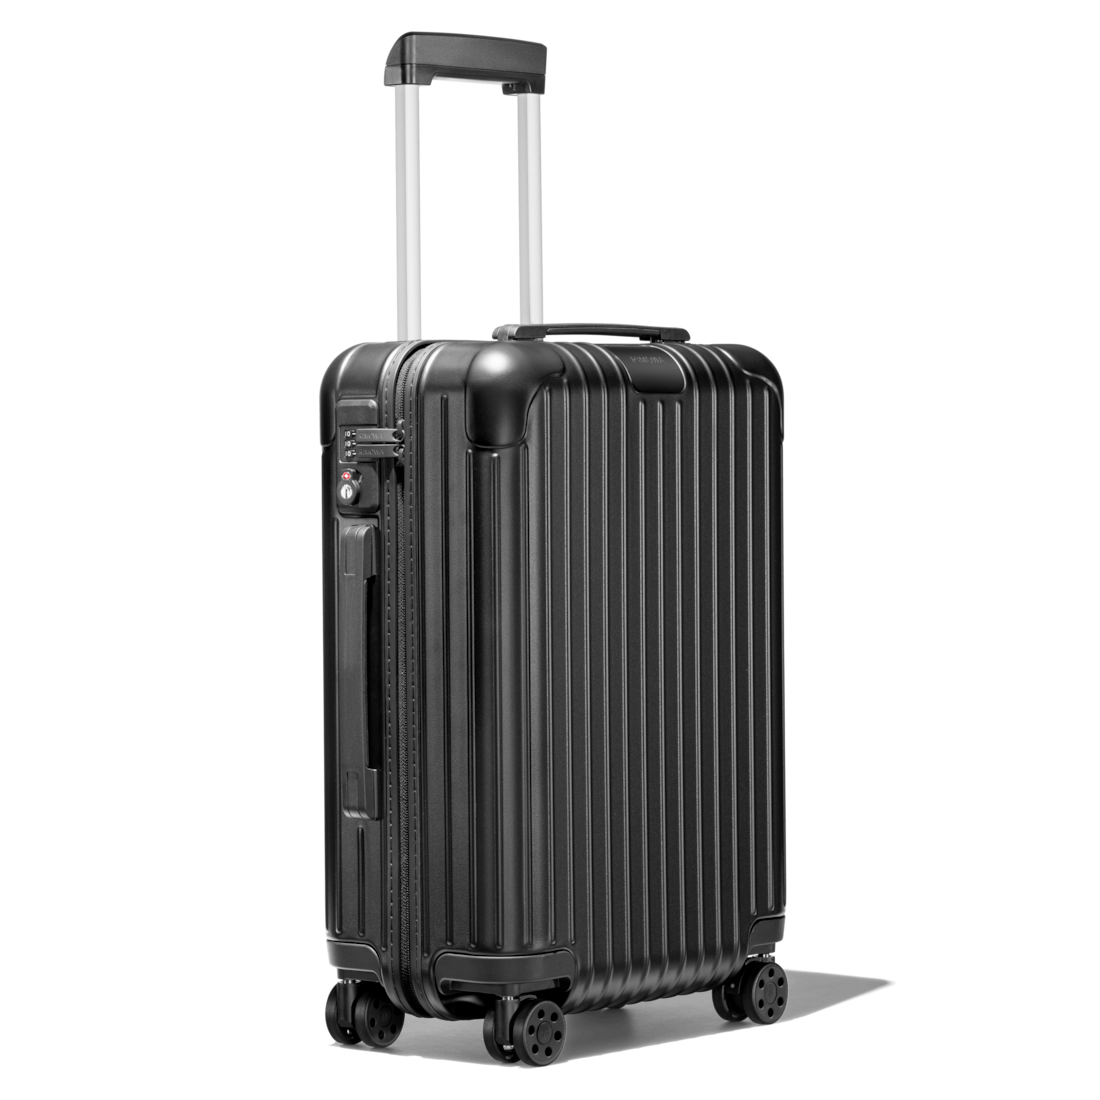 Essential Cabin S Lightweight Carry-On Suitcase | Matte Black | RIMOWA